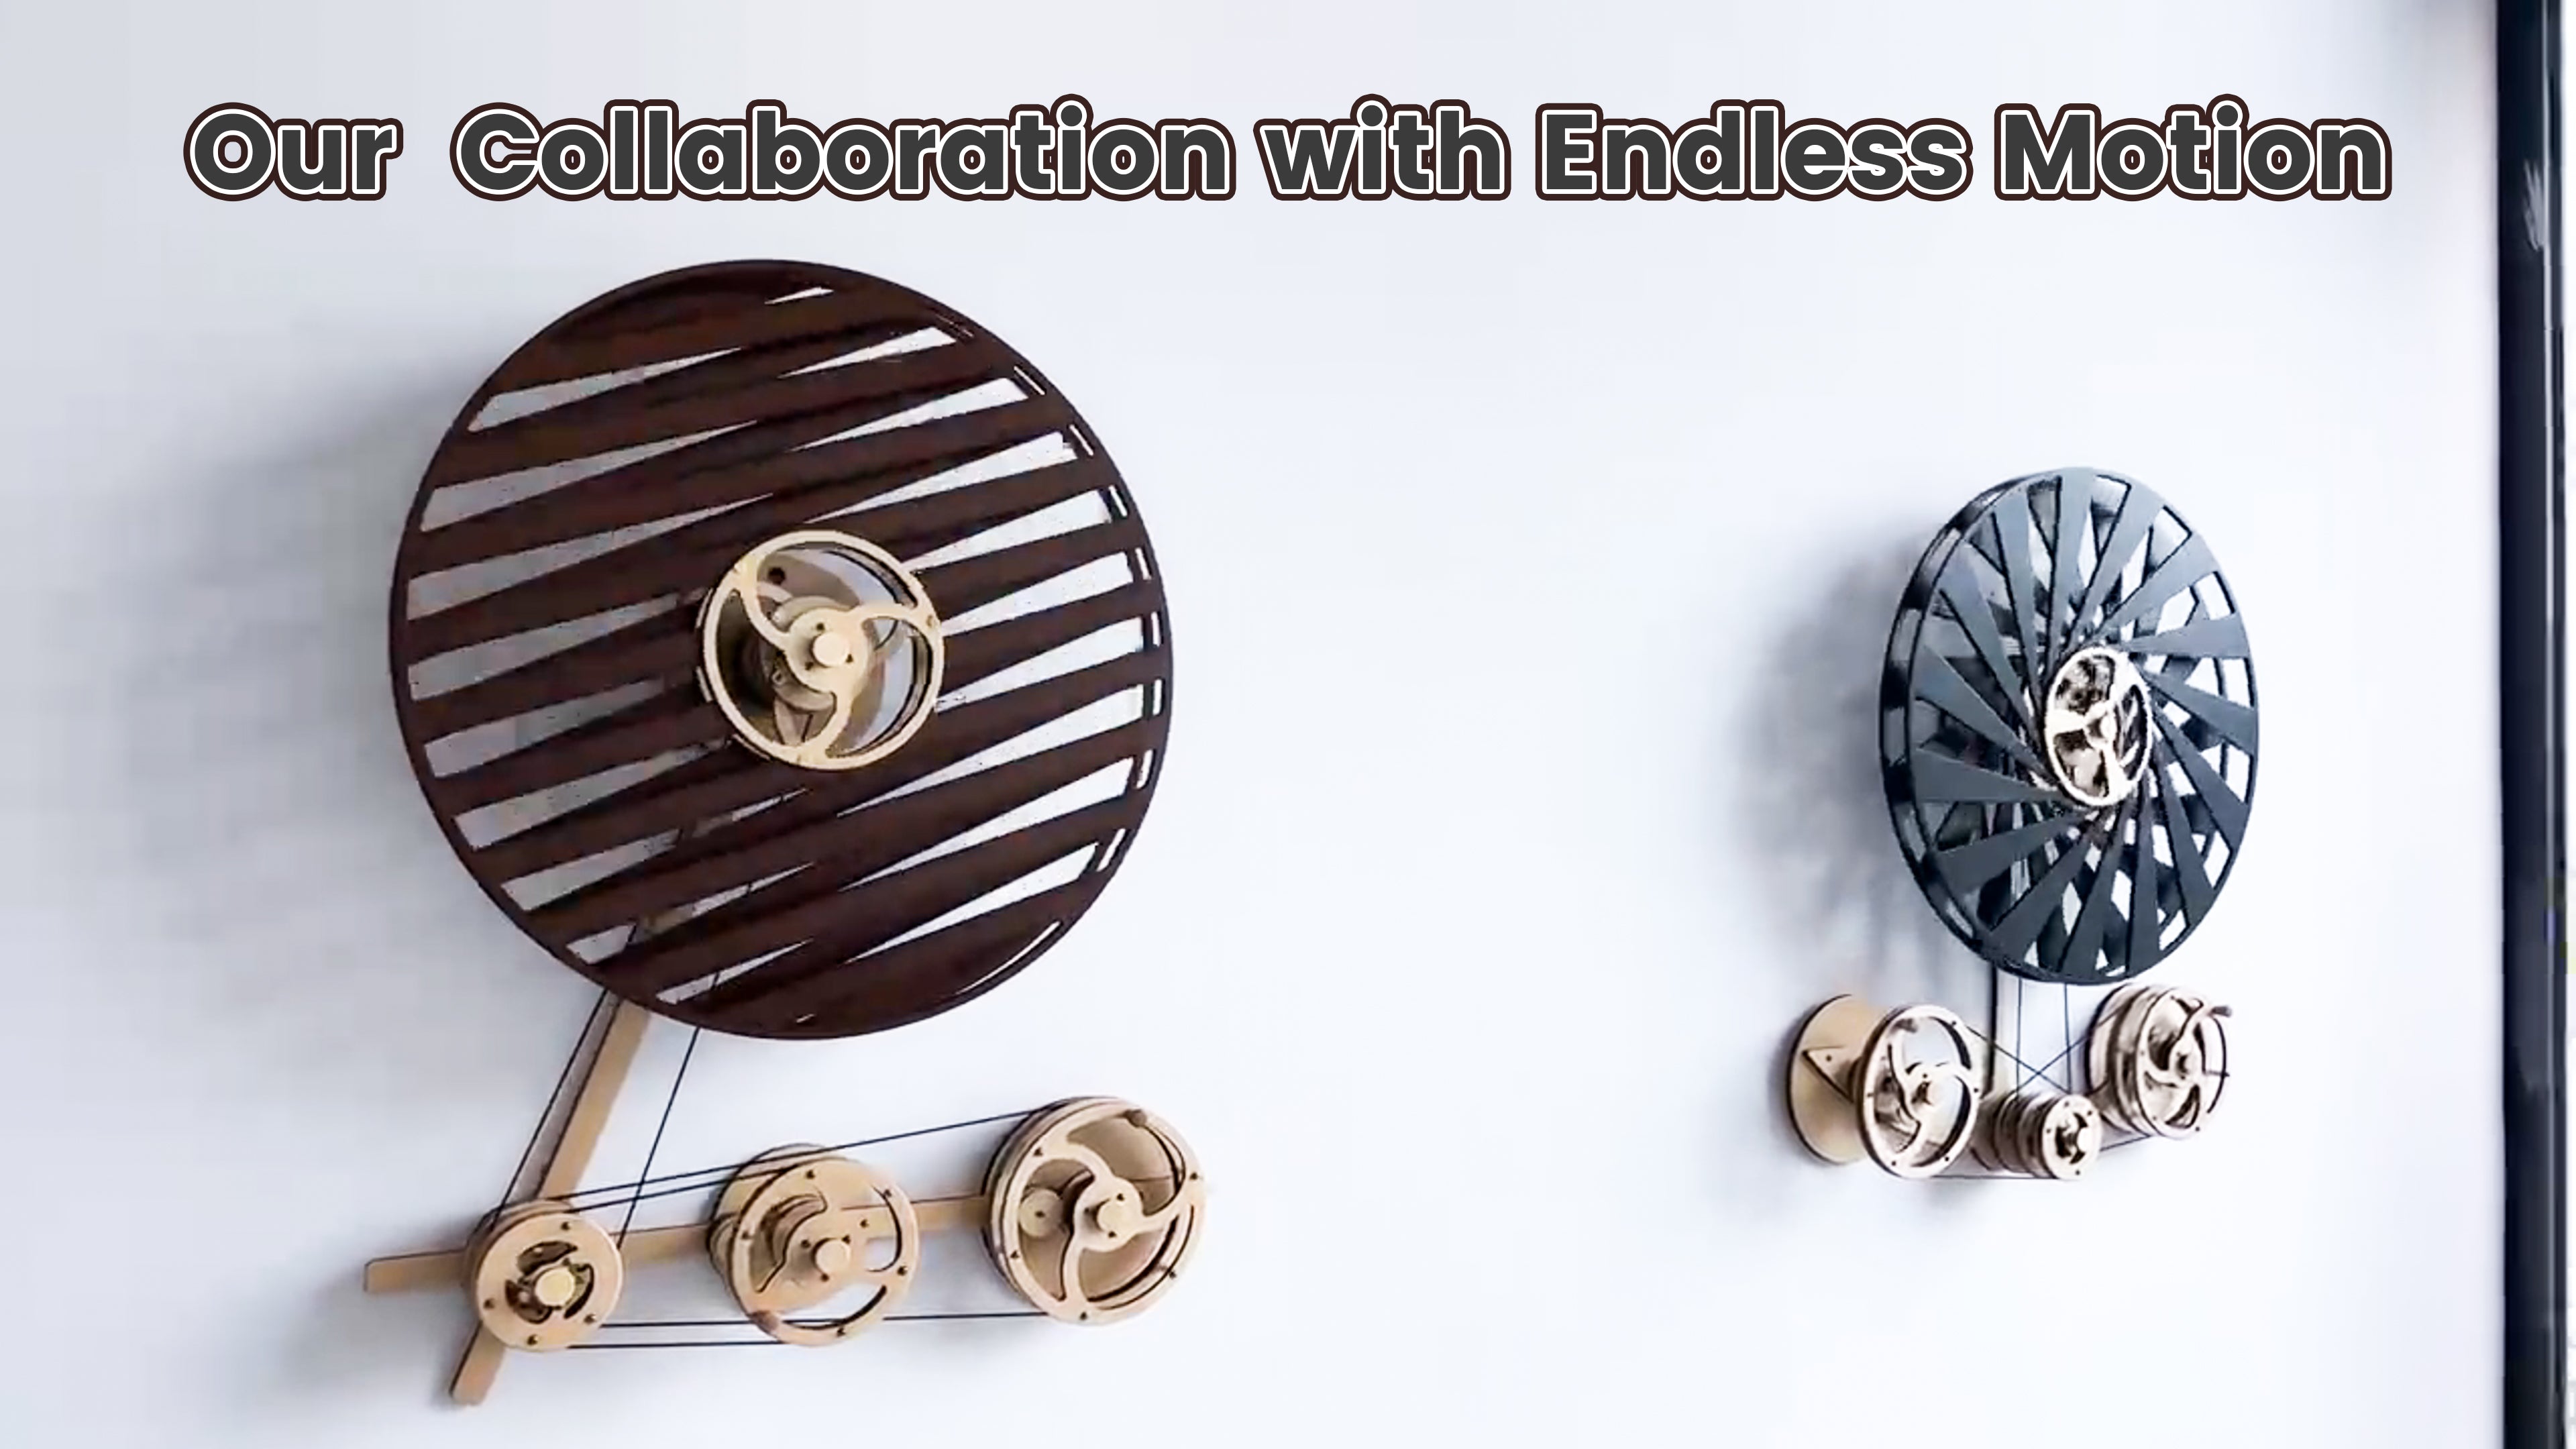 Our Collaboration with Endless Motion ▪ Mechanical Art